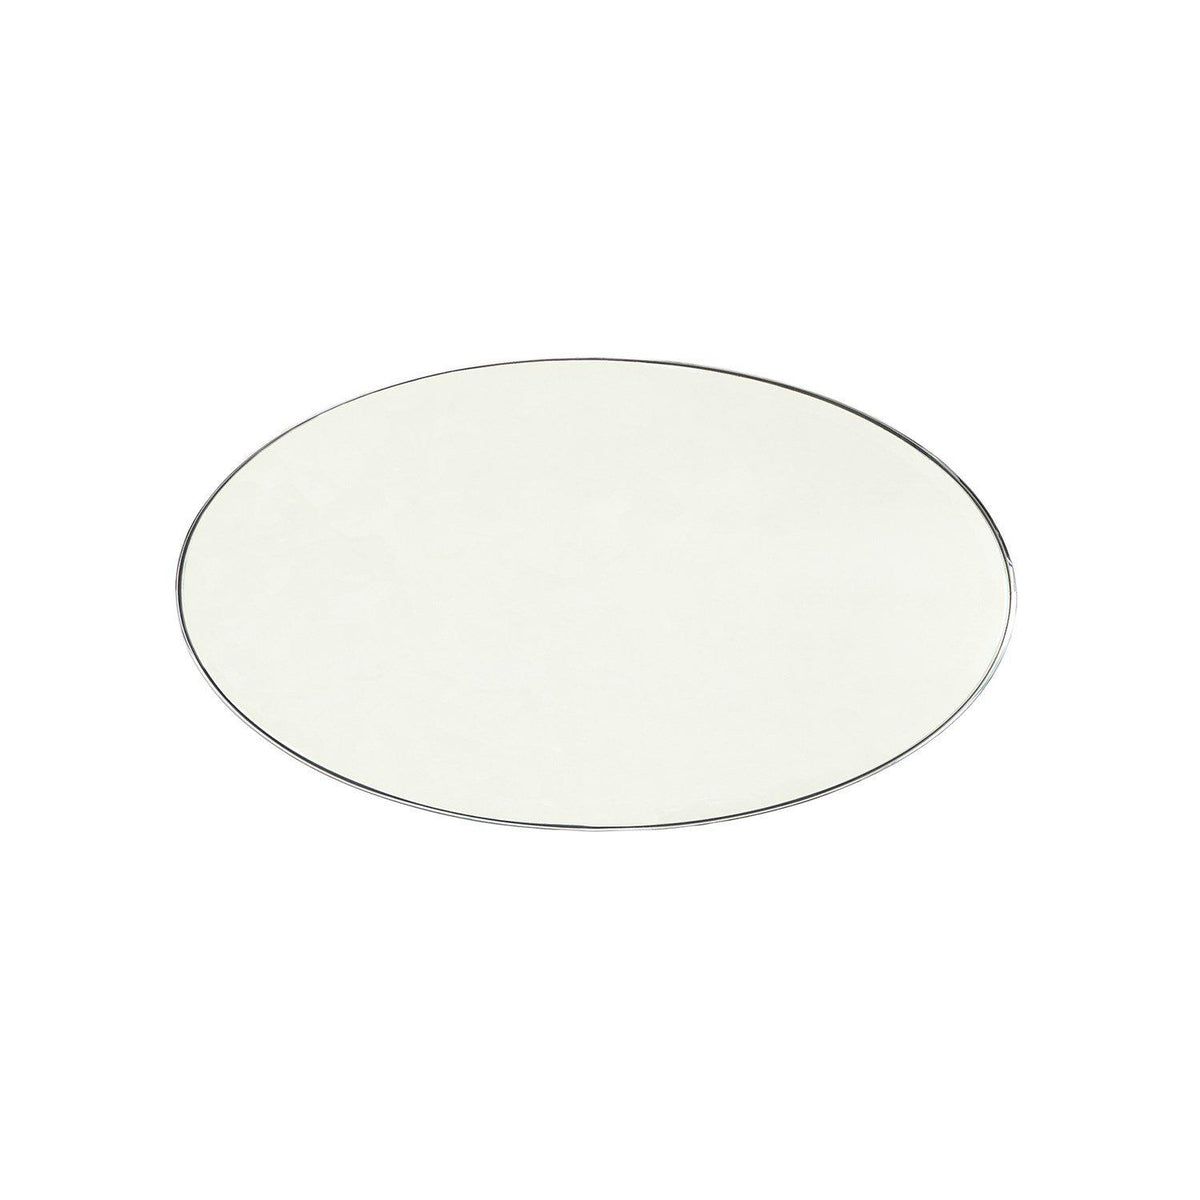 Elongated Oval Mirror-Nickel-Sm-Global Views-Wall Mirrors-Artistic Elements